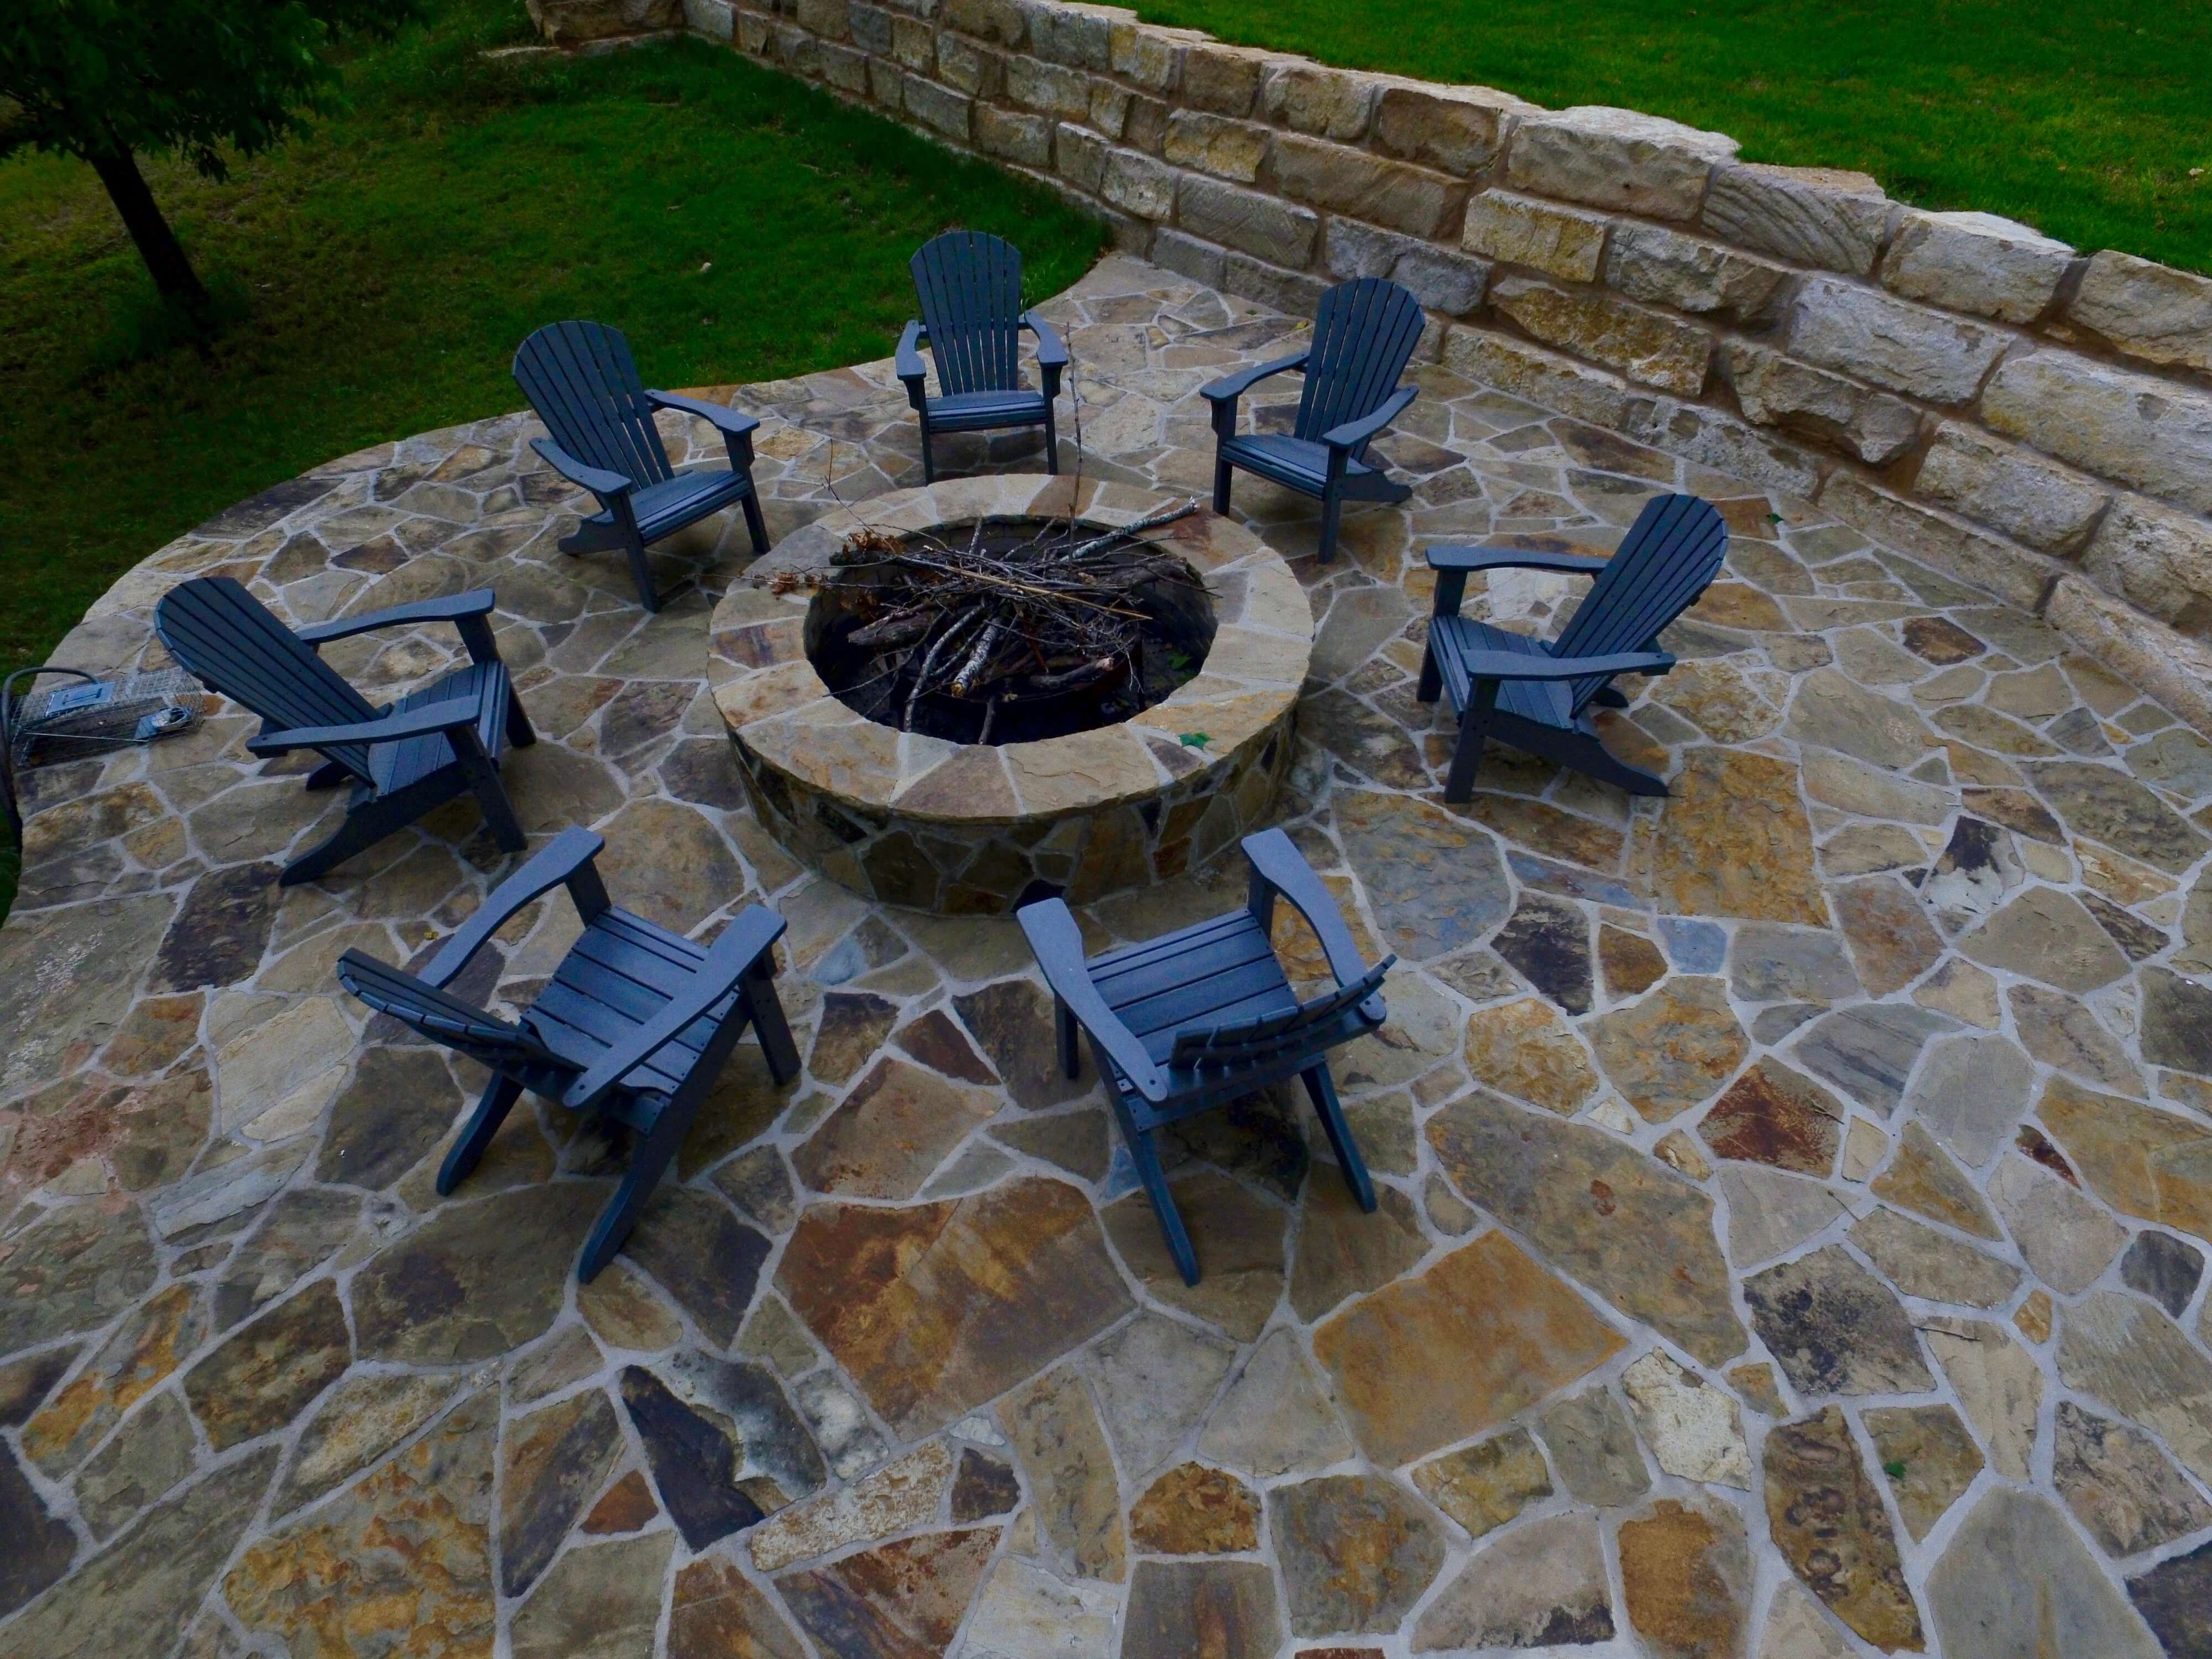 Outdoor Living Gallery Boerne Fireplaces New Braunfels San Antonio within size 4000 X 3000